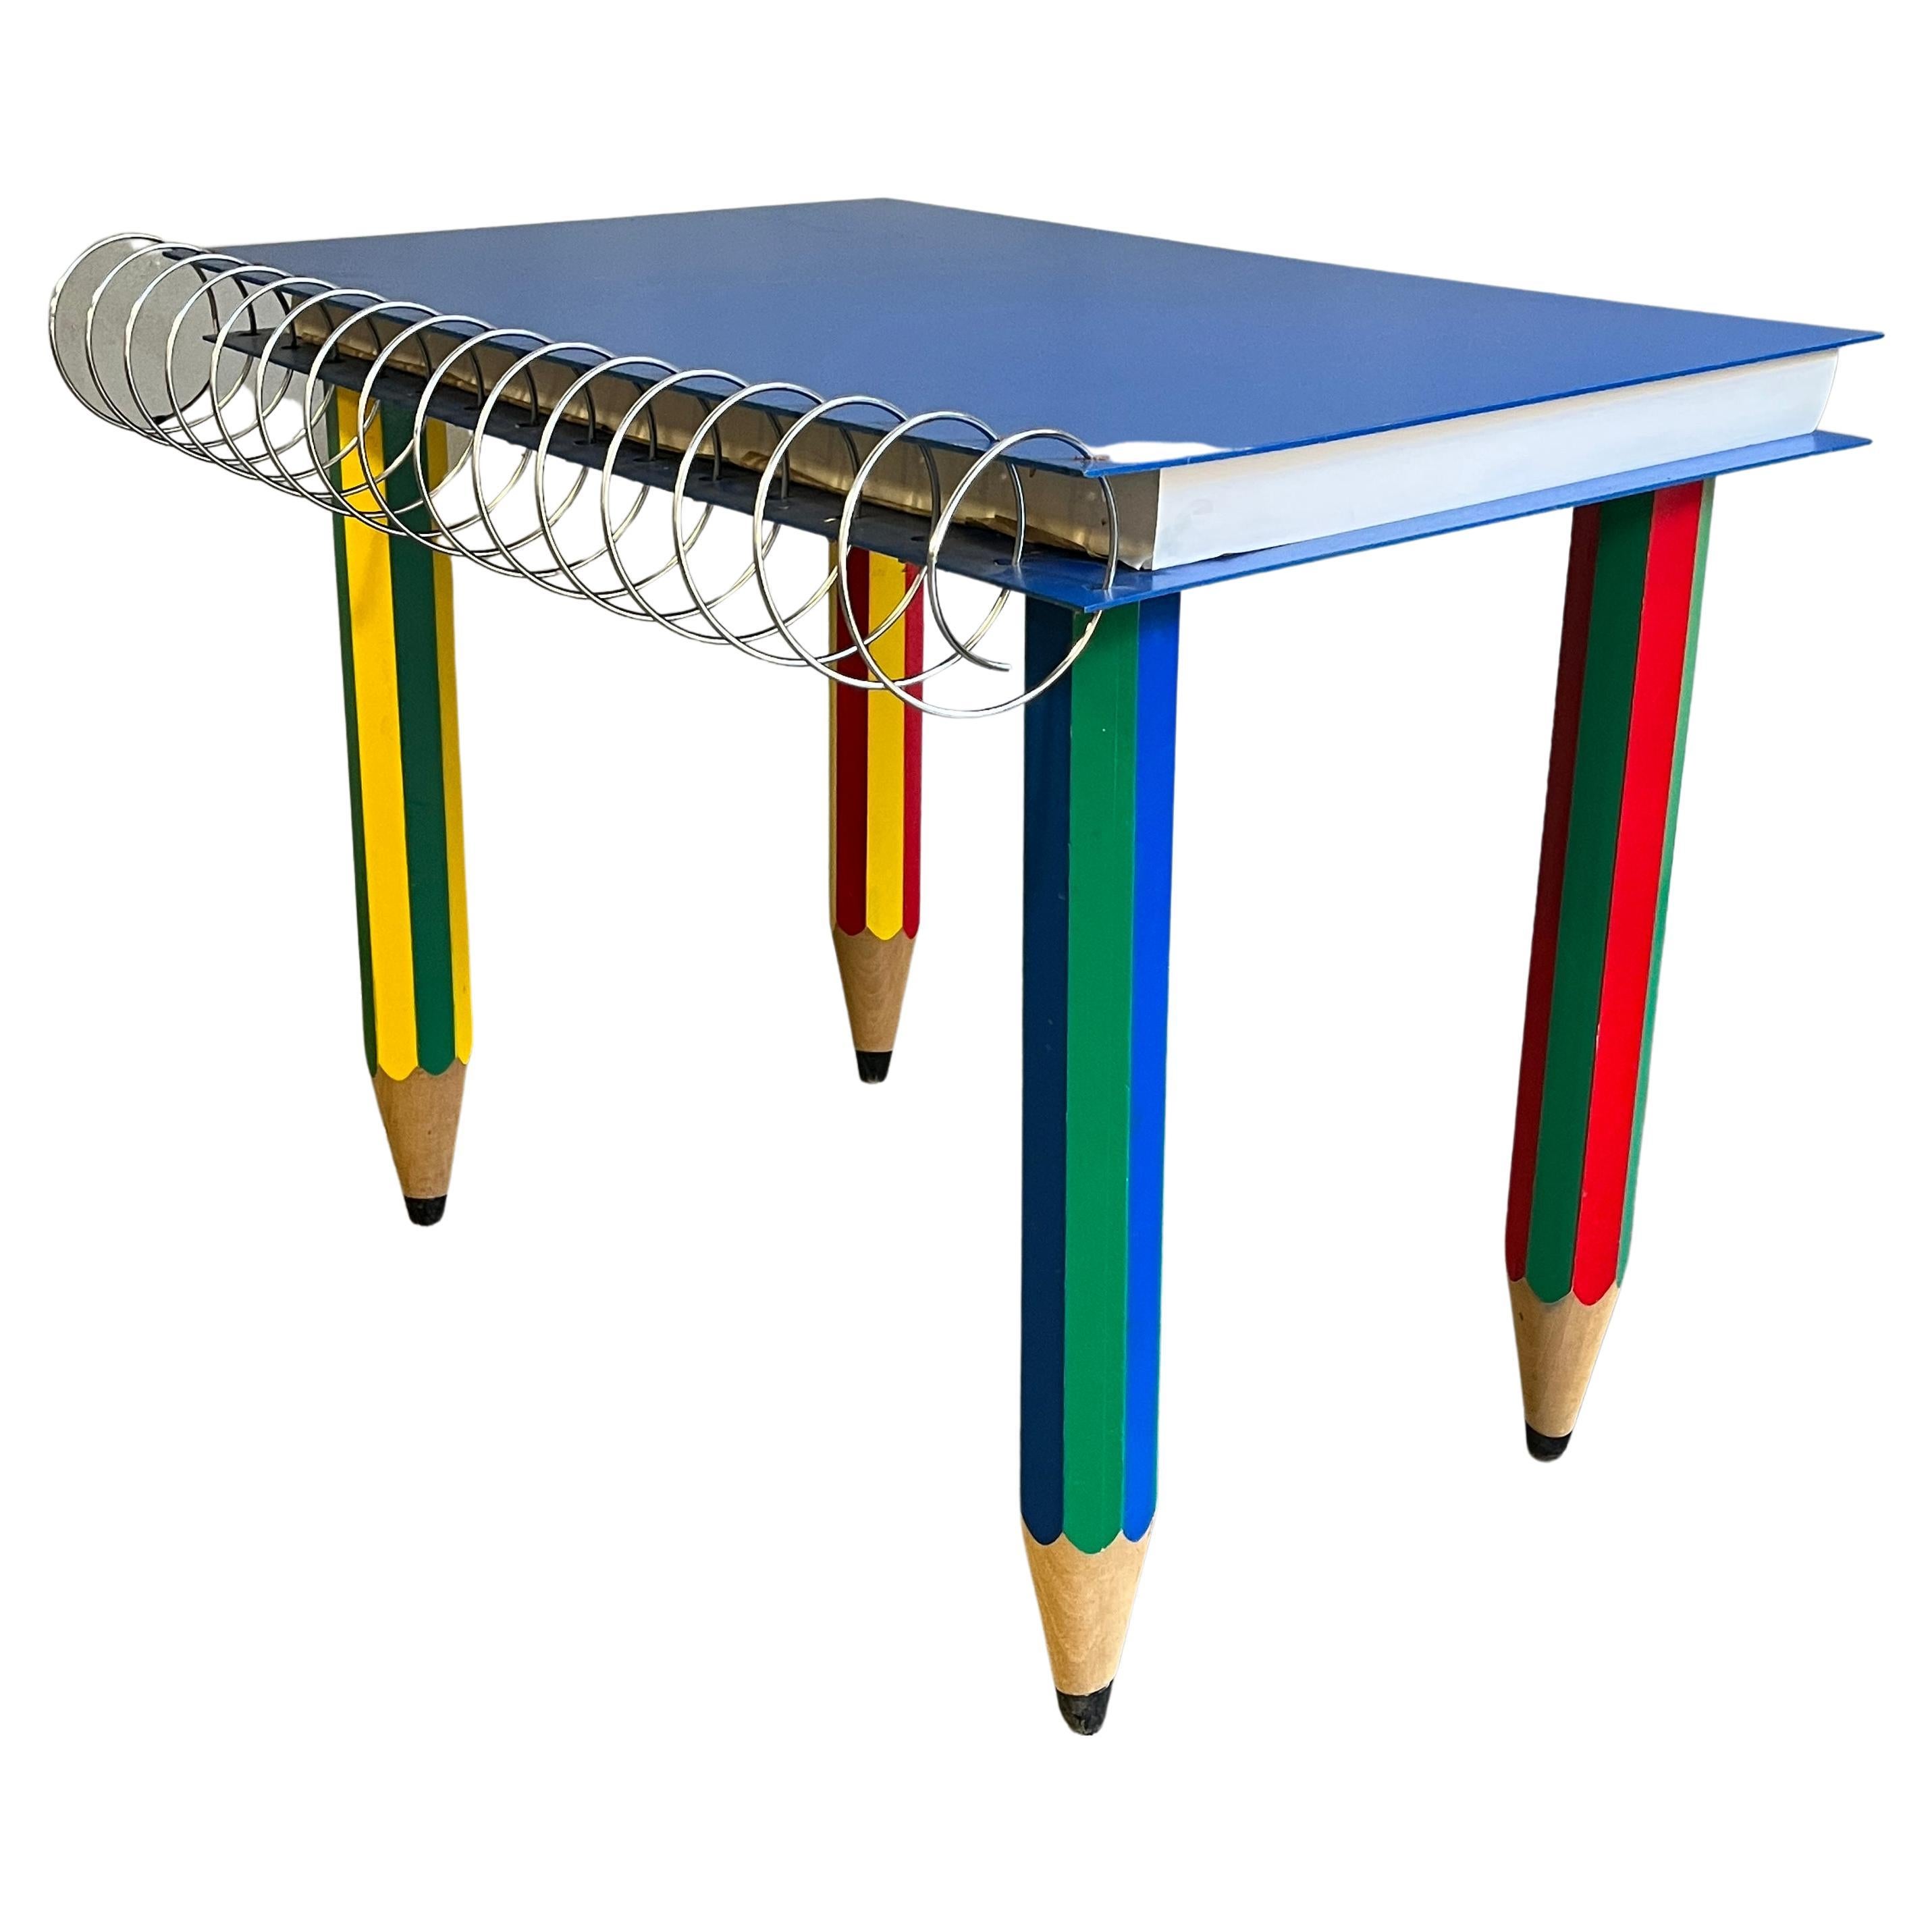 A rare Post Modern Memphis Milano style table or desk designed by artist Pierre Sala circa 1980's. Large and functional notebook on solid wood legs. Paper can easily be replaced. 

Some wear consistent with age and use.